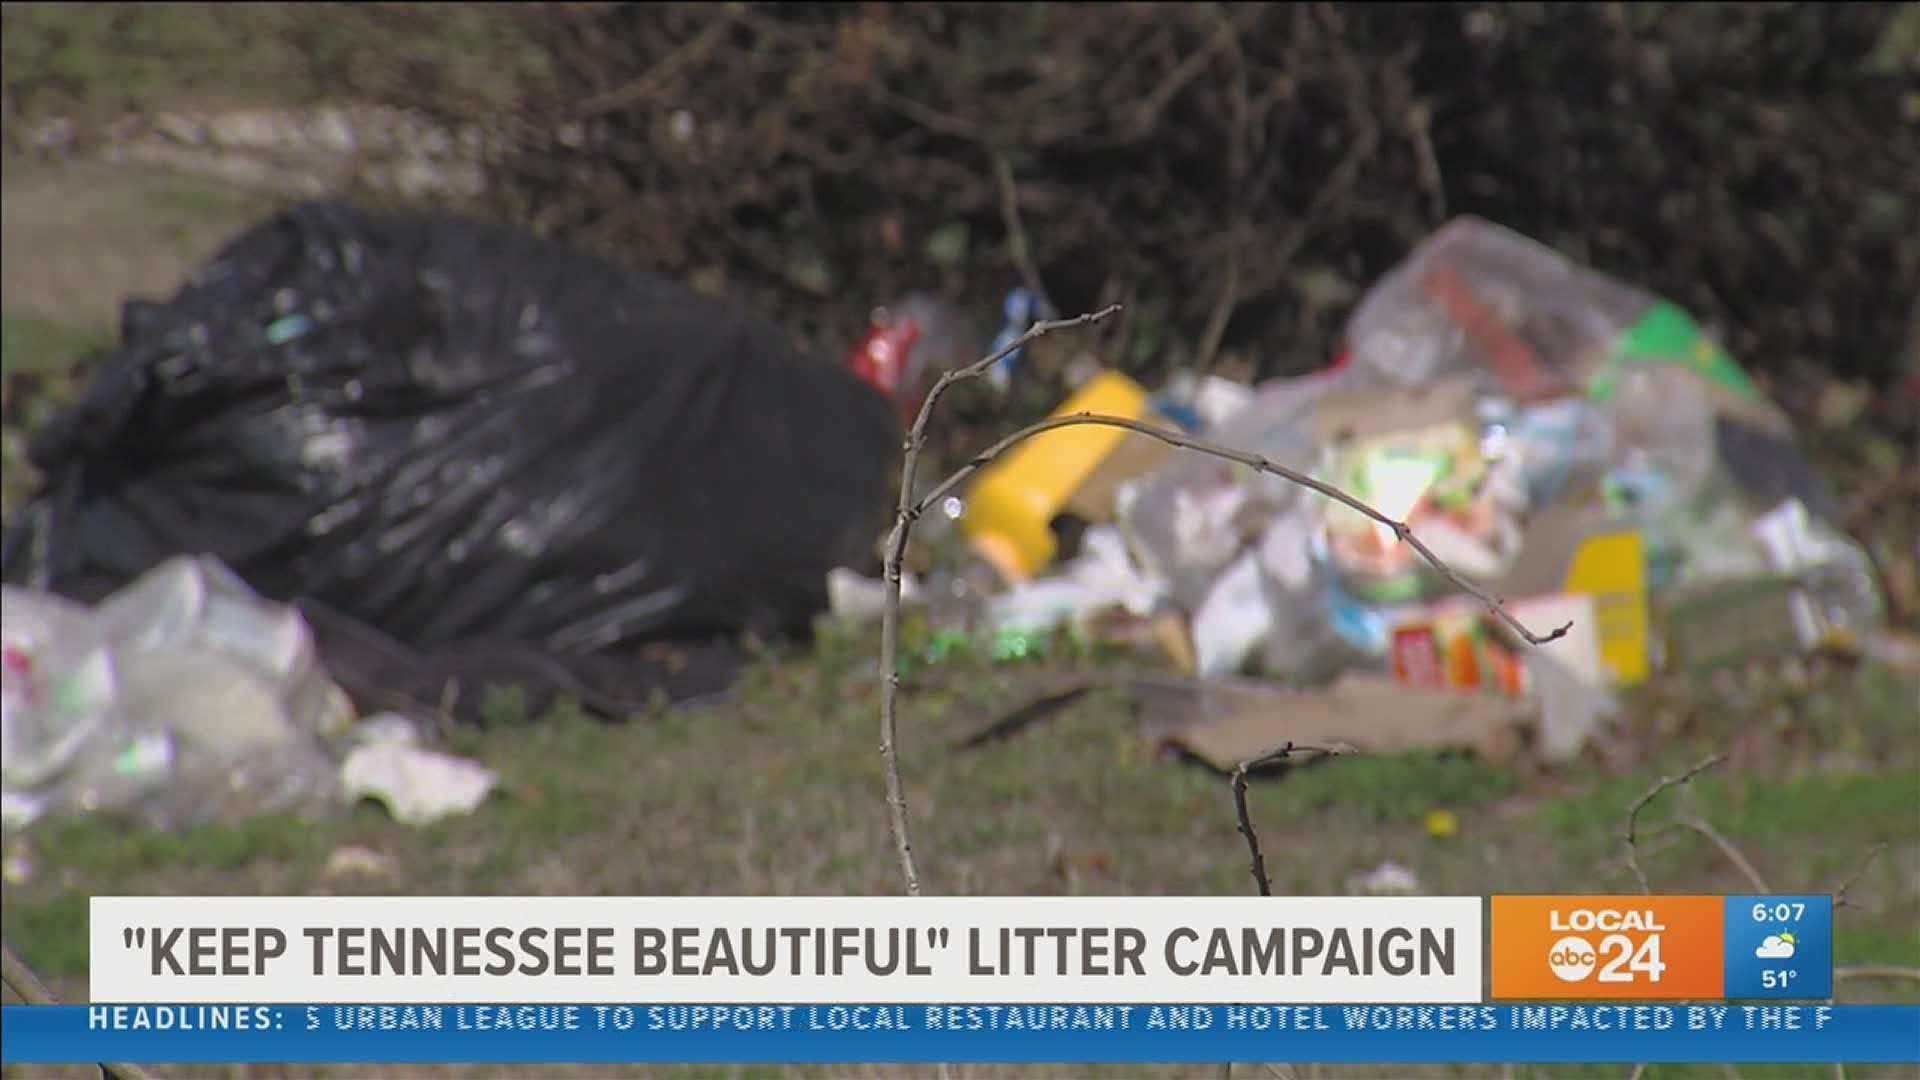 March is Keep Tennessee Beautiful month and all month, the organization is encouraging people to get out and clean up